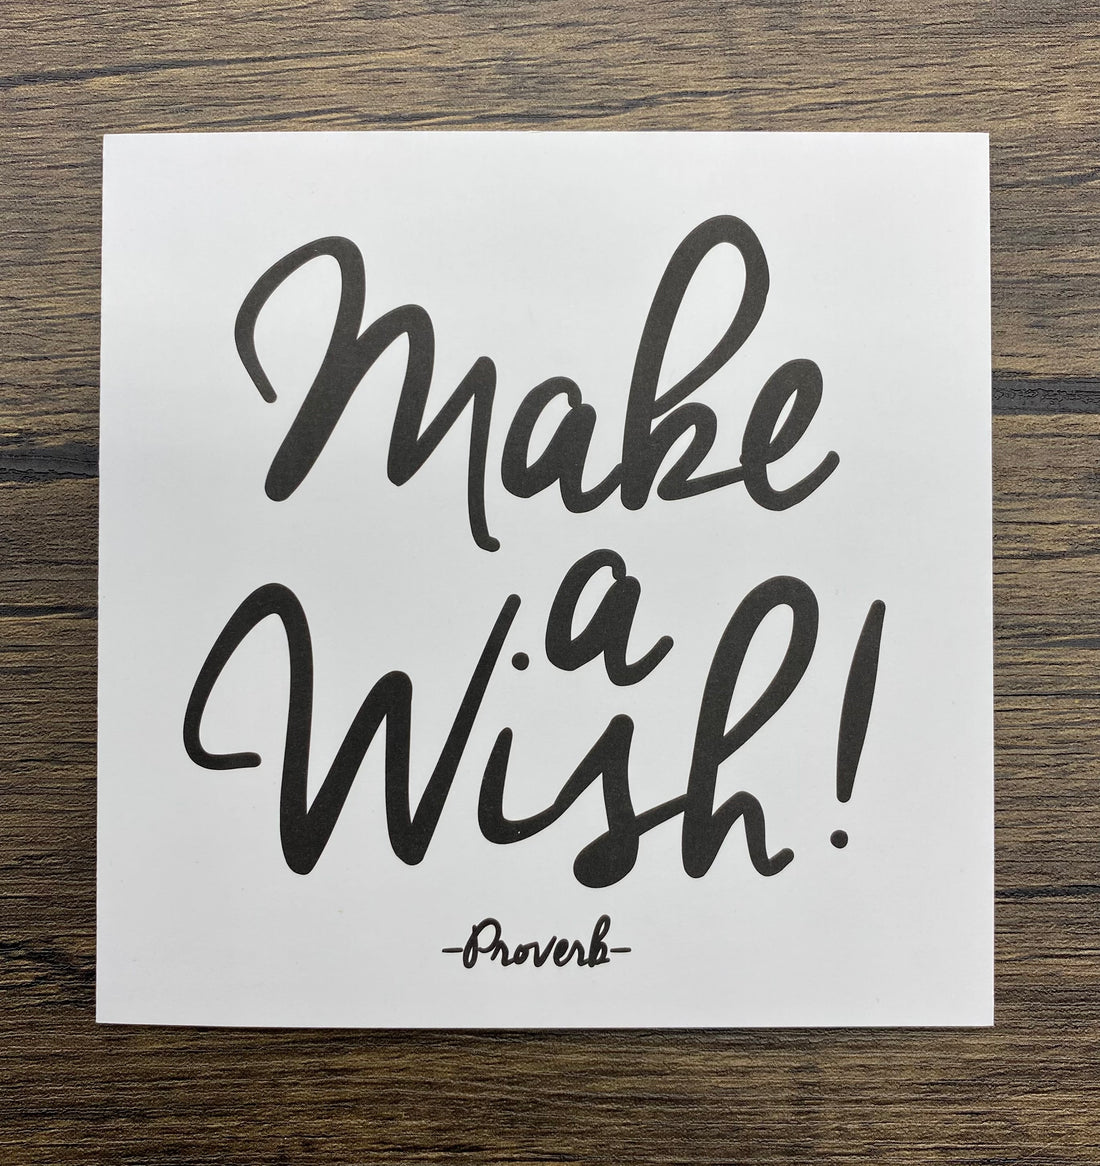 Quotable Card: Make a wish!